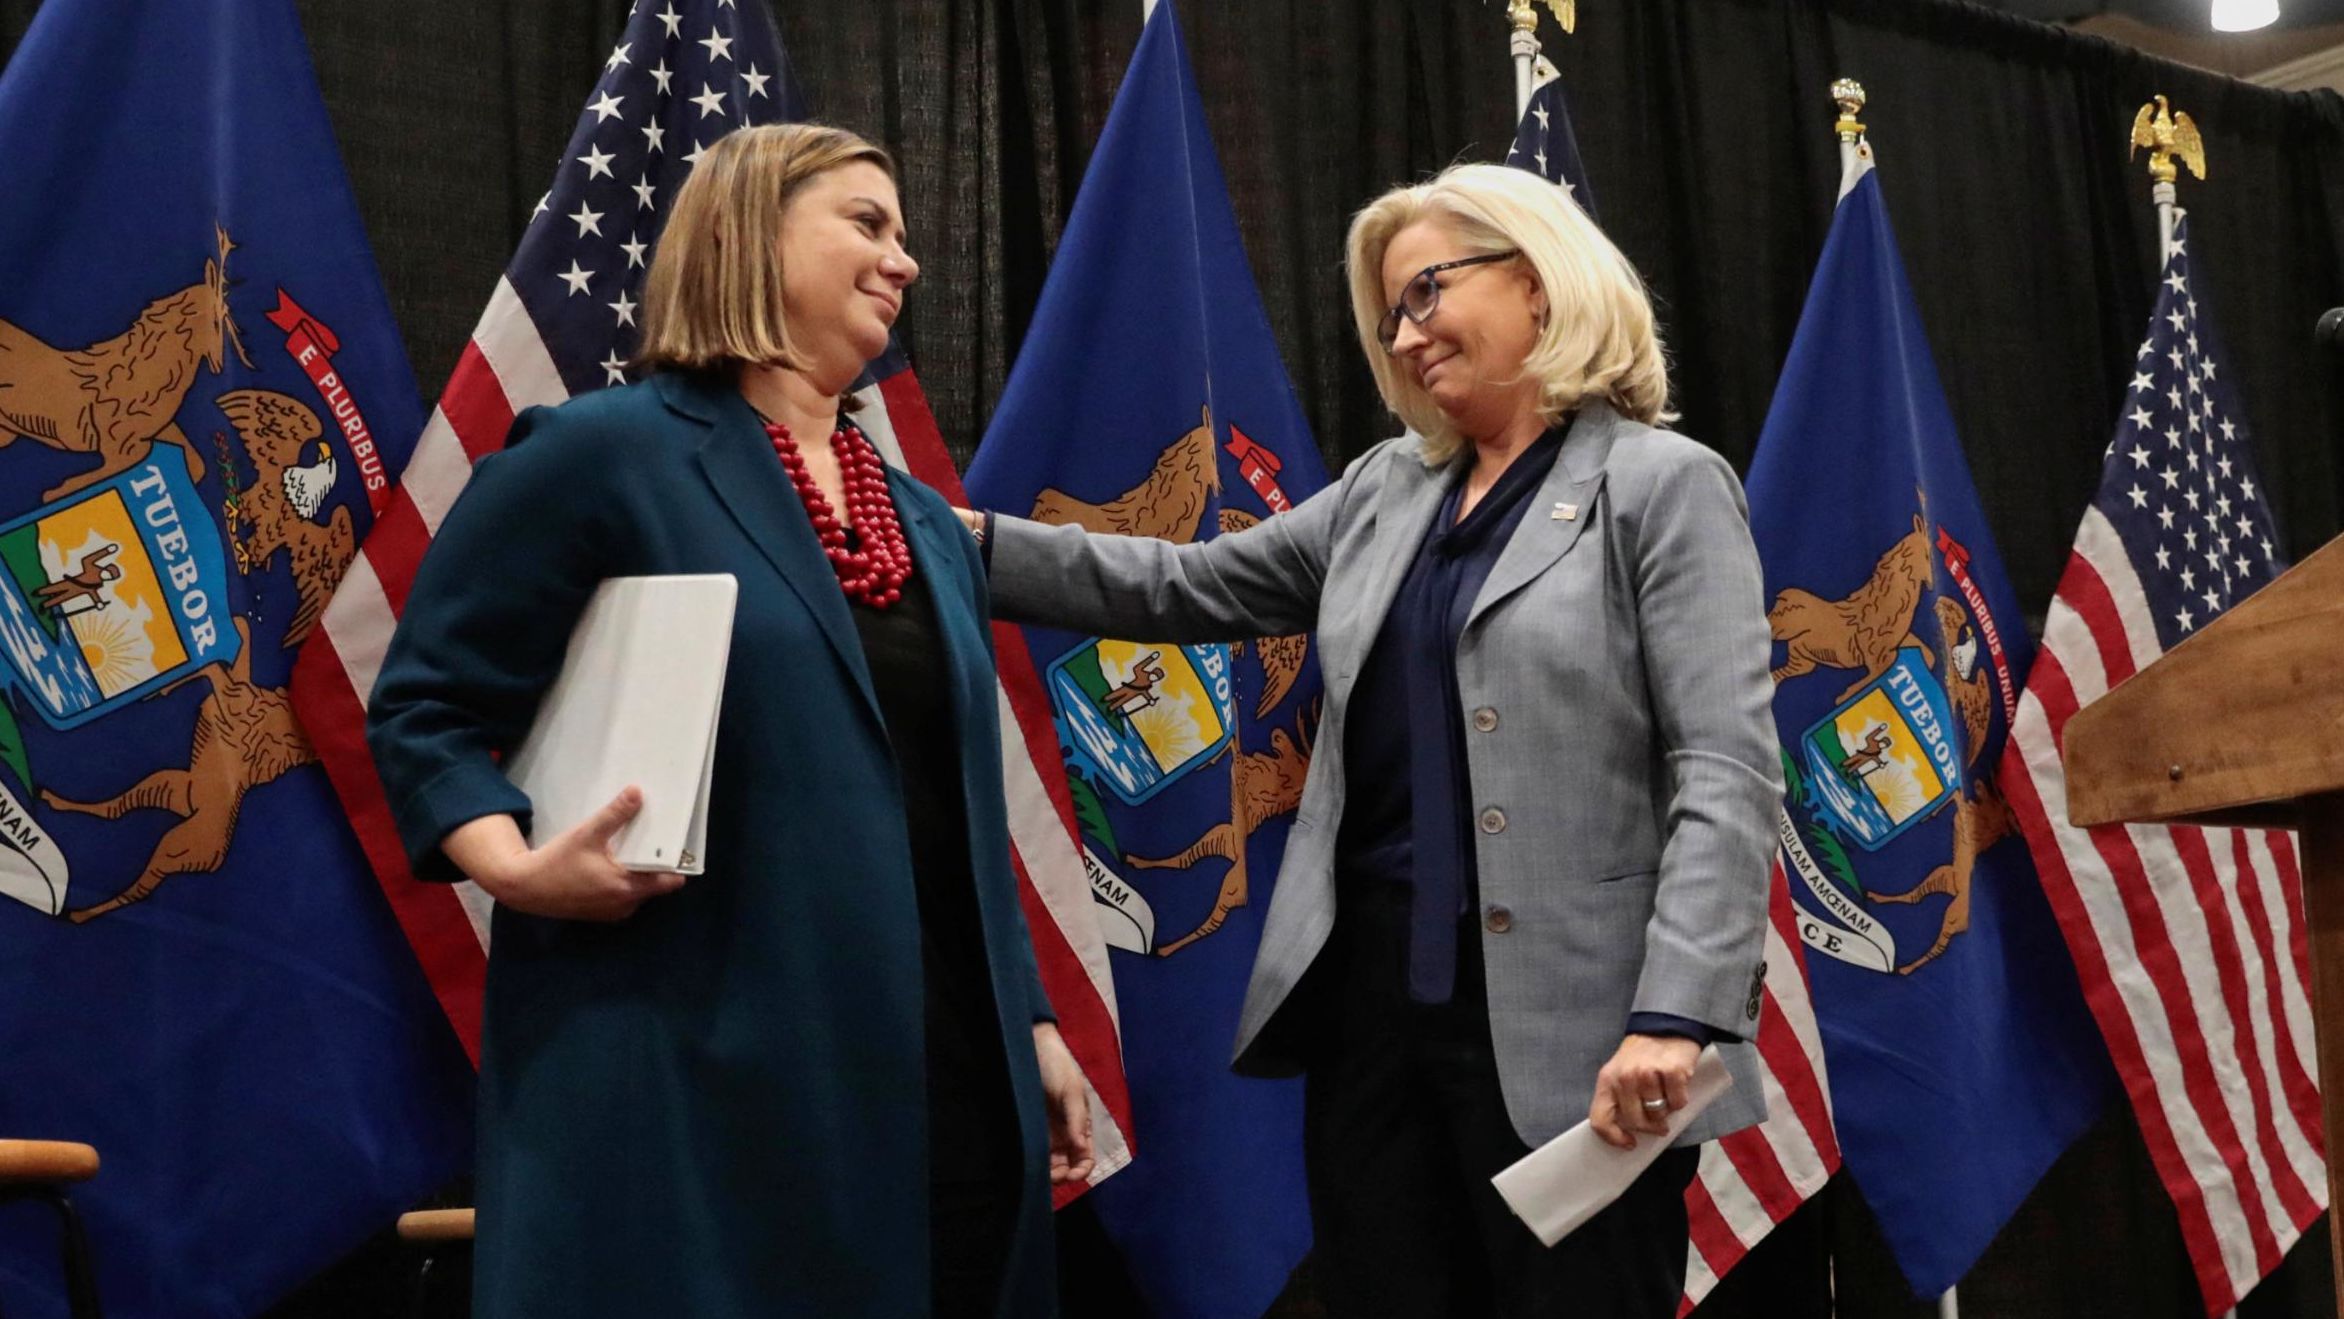 Republican Rep. Liz Cheney of Wyoming, right, <a href="https://www.cnn.com/2022/11/01/politics/liz-cheney-elissa-slotkin-2022-midterms" target="_blank">endorses Democratic Rep. Elissa Slotkin</a> of Michigan on Tuesday, November 1, in Lansing, Michigan. Cheney lost her primary race to a challenger backed by former US President Donald Trump after becoming one of his most vocal critics within the Republican Party. "If we want to ensure the survival of the republic, we have to walk away from politics as usual," Cheney said Tuesday. "We have to stand up — every one of us — and say we're going to do what's right for this country and we're going to look beyond partisan politics."